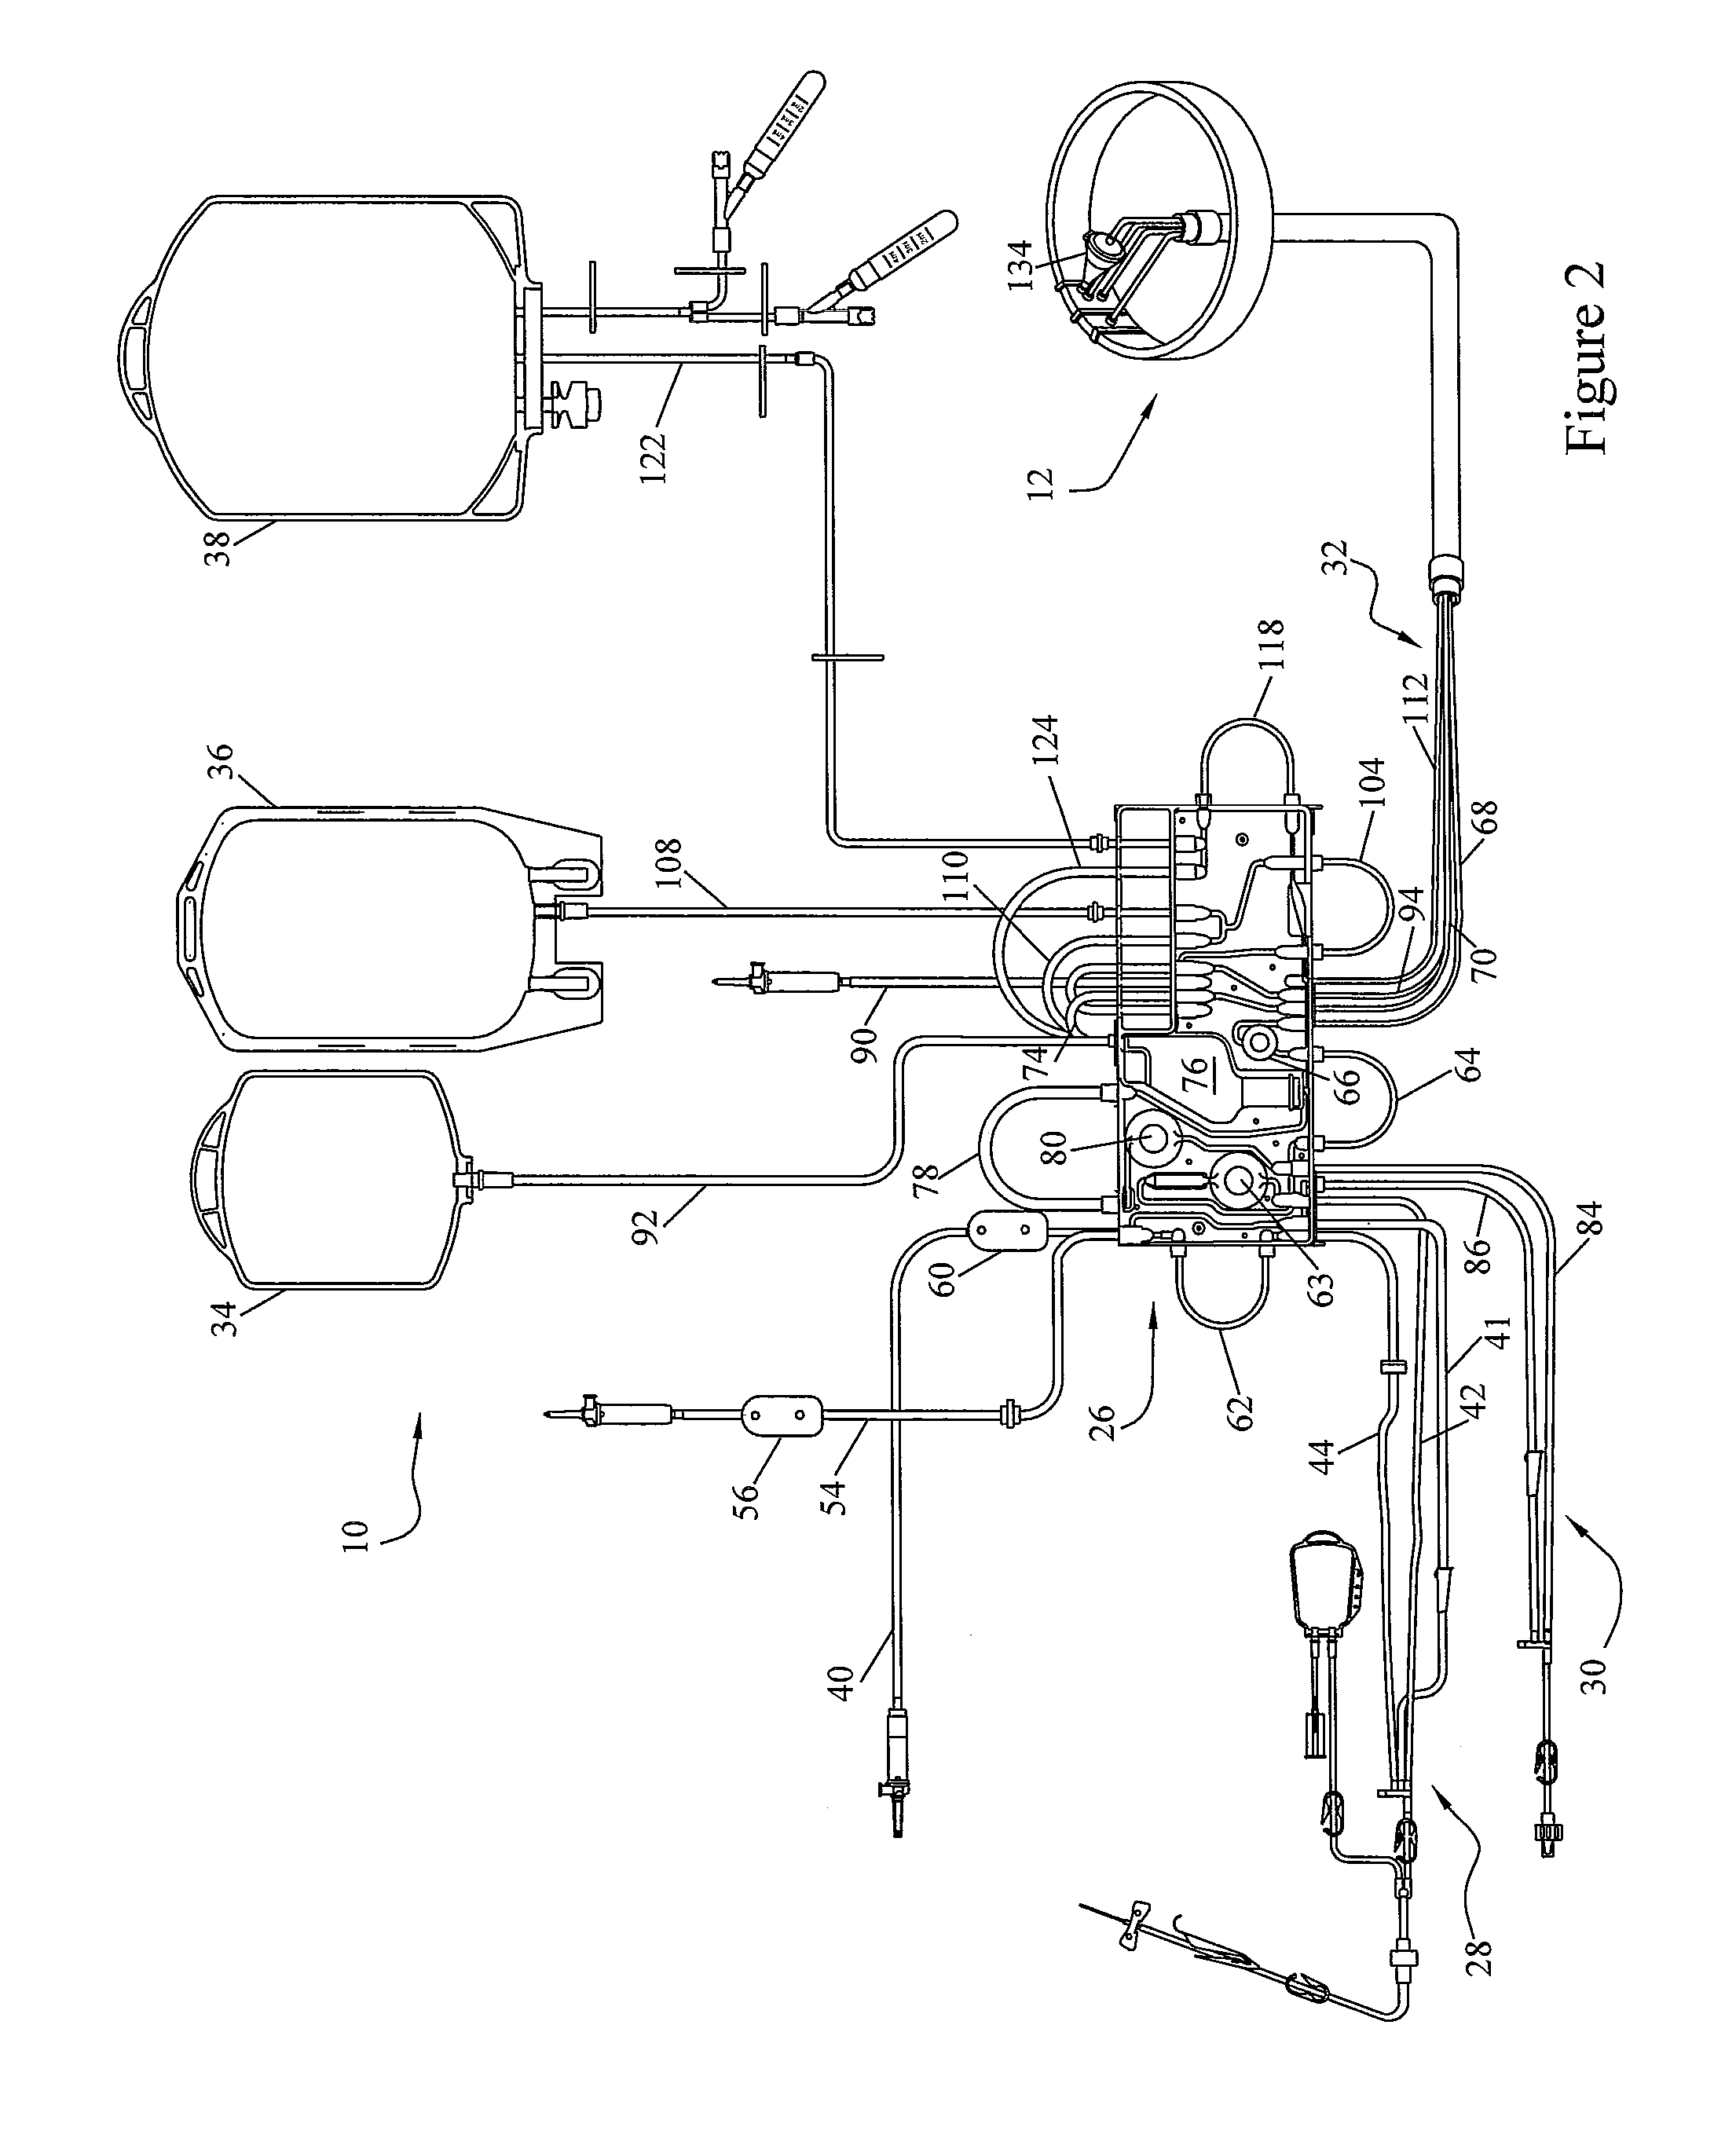 Blood processing apparatus and method with automatically adjusted collection targets